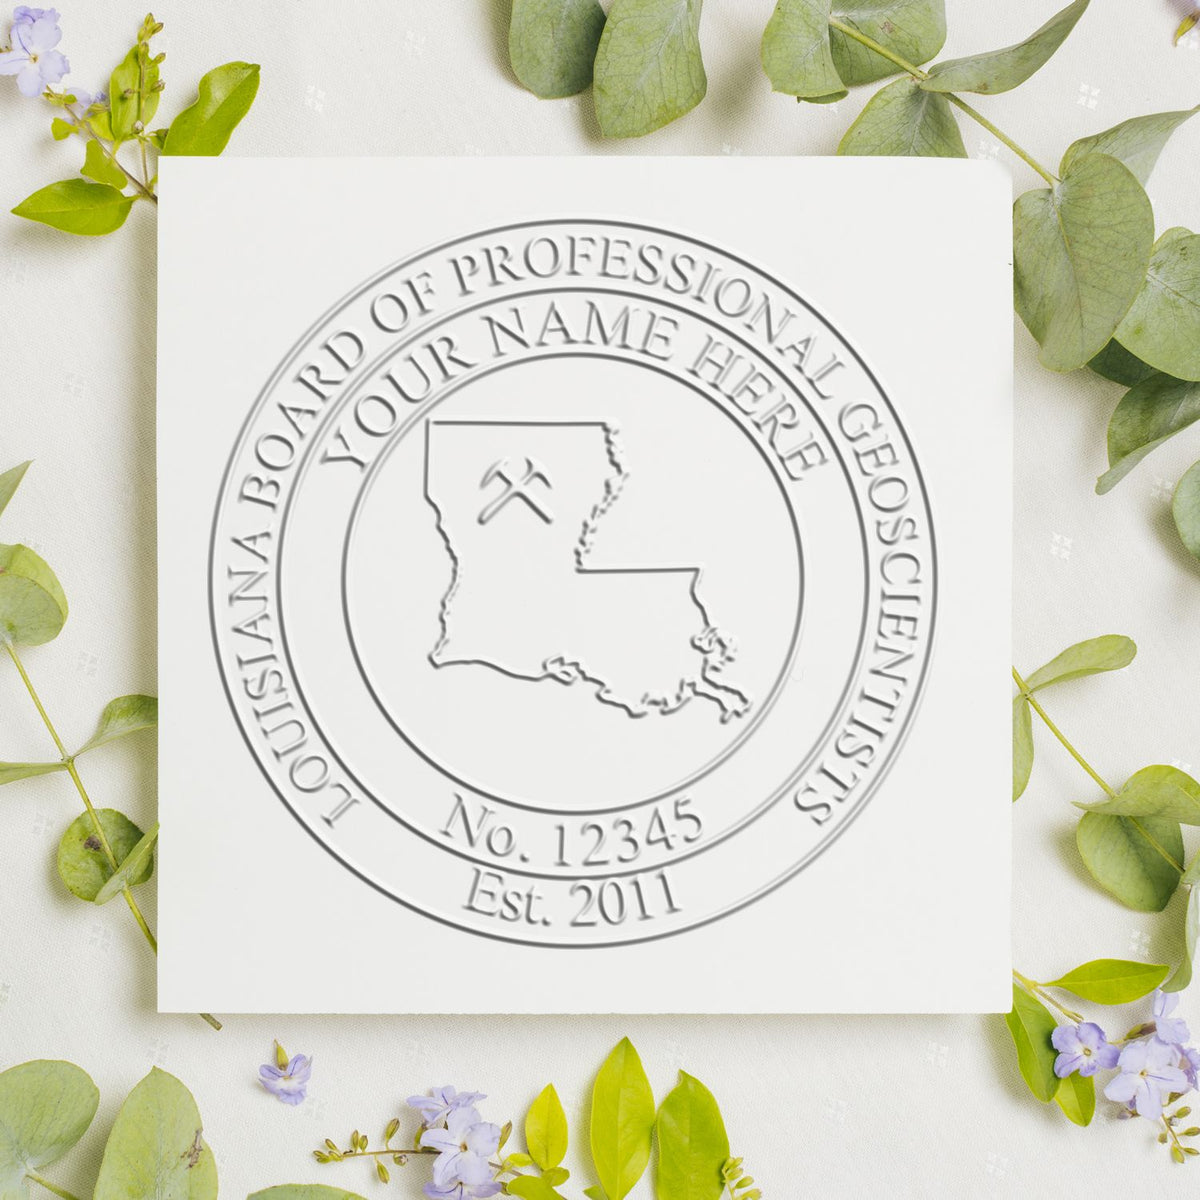 An alternative view of the Soft Louisiana Professional Geologist Seal stamped on a sheet of paper showing the image in use